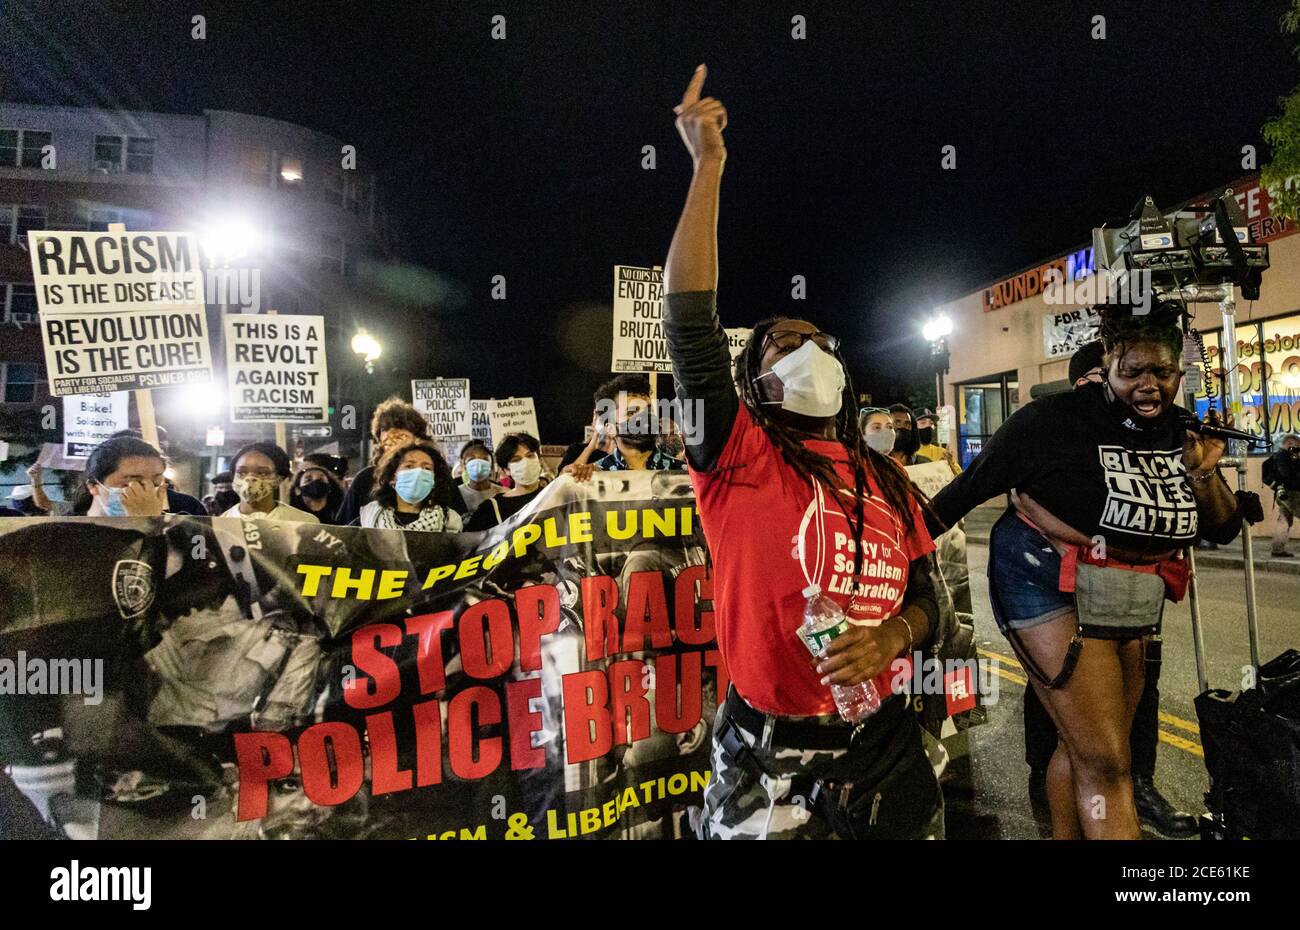 Boston, USA. August 30, 2020, Boston, Massachusetts, USA: Demonstrators march as they rally against racial inequality and to call for justice a week after Black man Jacob Blake was shot several times by police in Kenosha, in Boston. Credit: Keiko Hiromi/AFLO/Alamy Live News Stock Photo